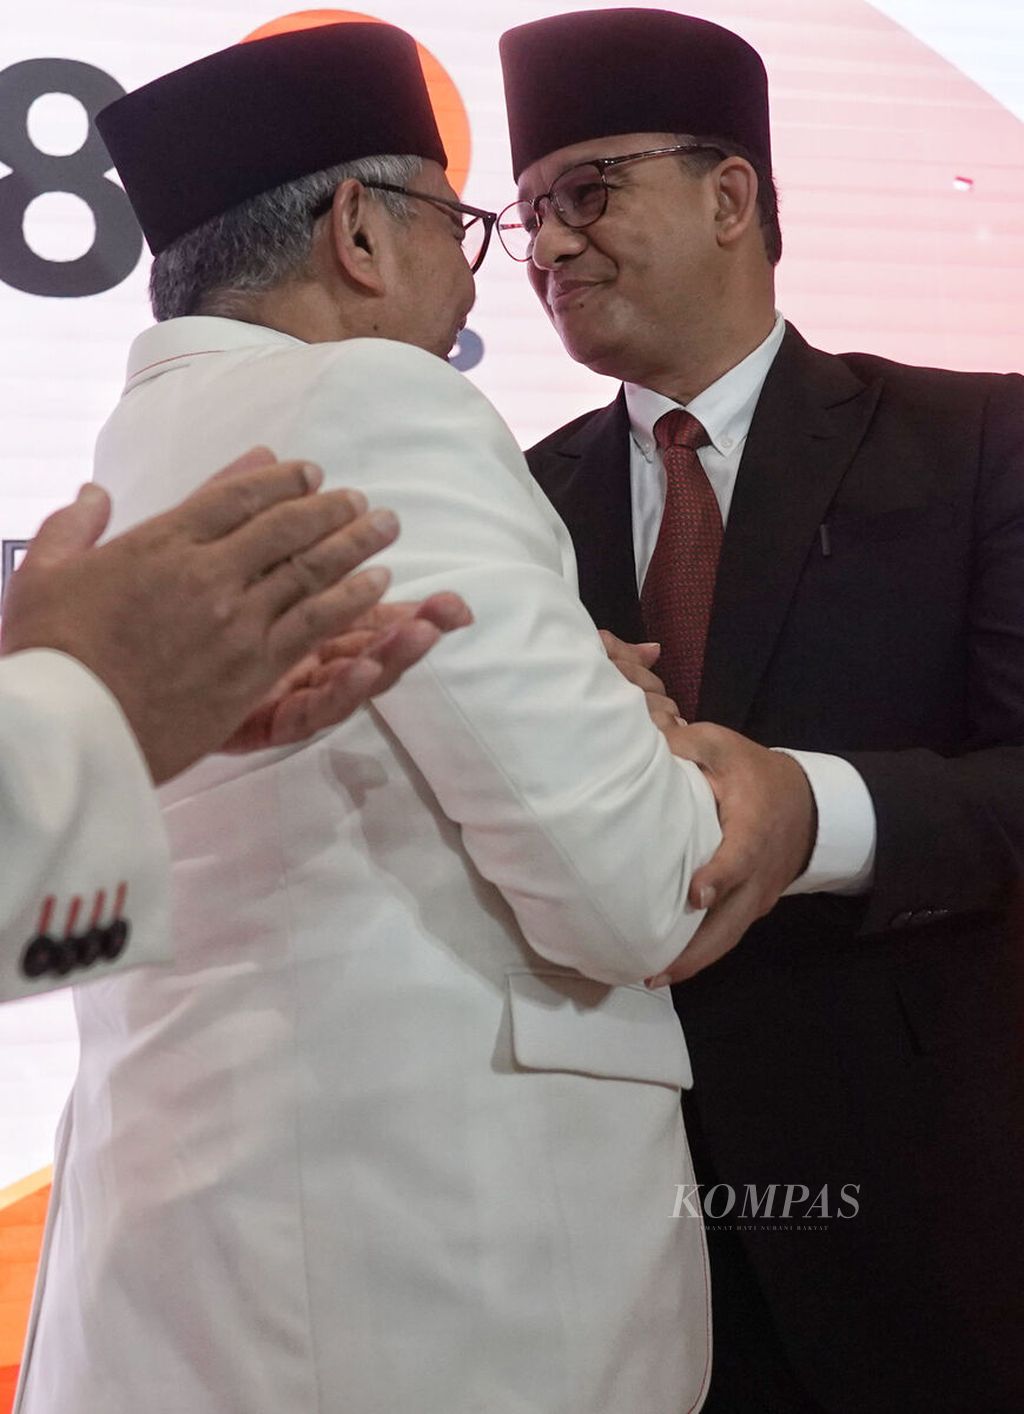 PKS President Ahmad Syaikhu (left) shakes hands with Anies Baswedan during a Declaration of support for Anies Baswedan as a presidential candidate in the 2024 Election at the Prosperous Justice Party (PKS) DPP Office, Jakarta, Thursday (23/2/2023).